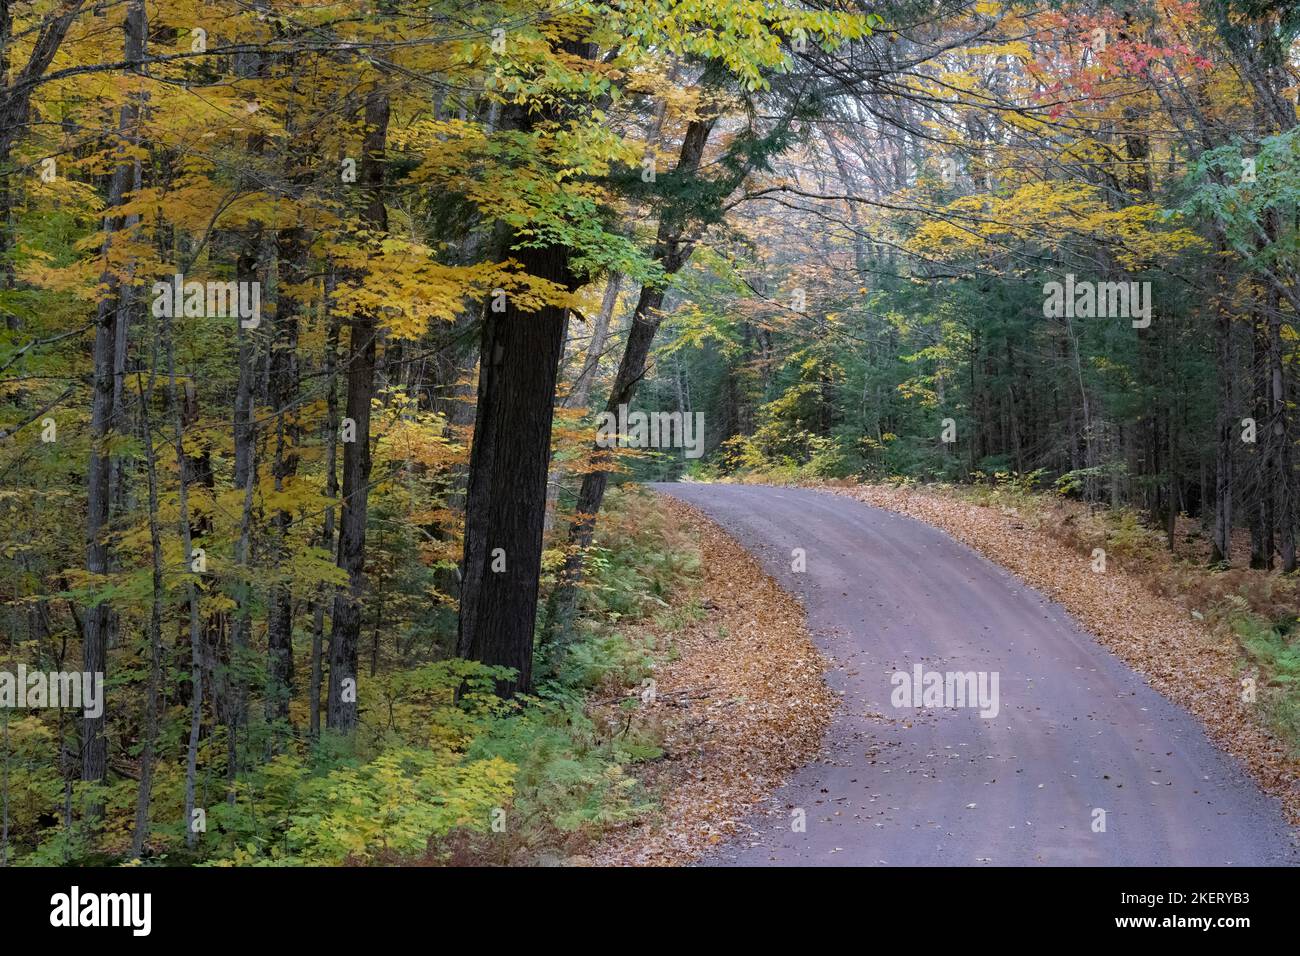 The forest service roads in the Chequamegon-Nicolet national forest in Northern Wisconsin come alive with color in late September early October. Stock Photo